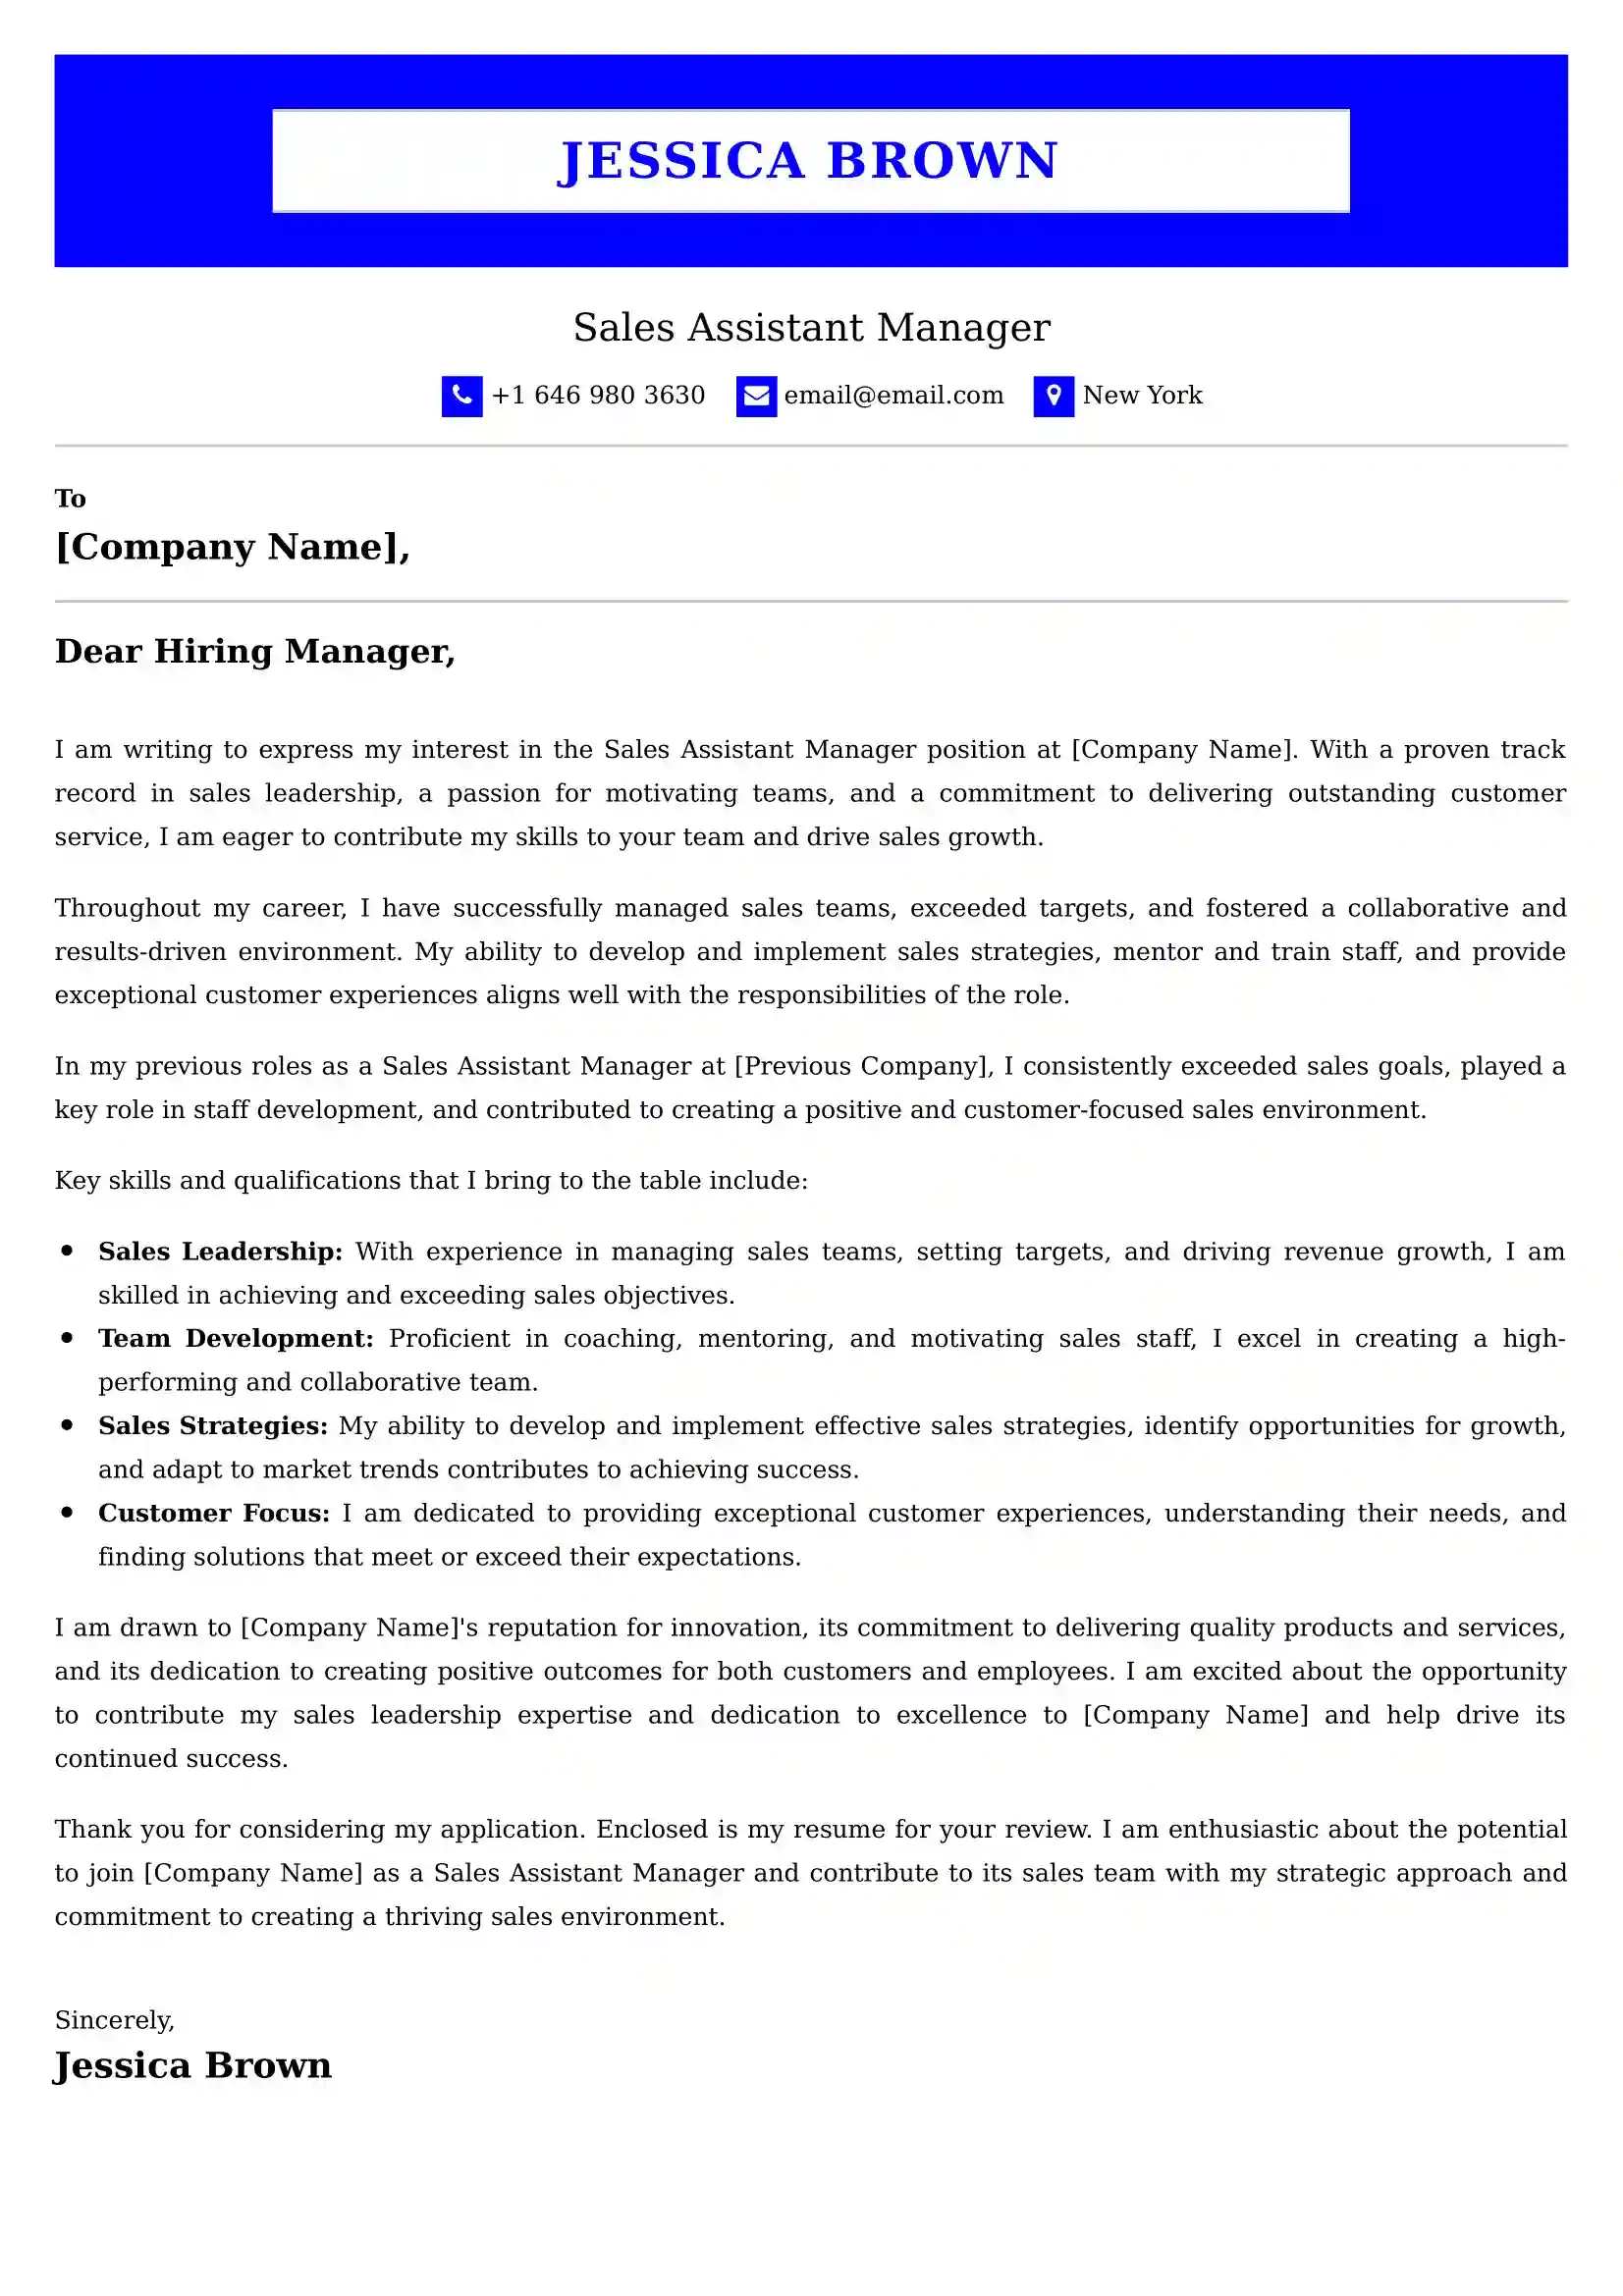 Sales Assistant Manager Cover Letter Examples for UAE 